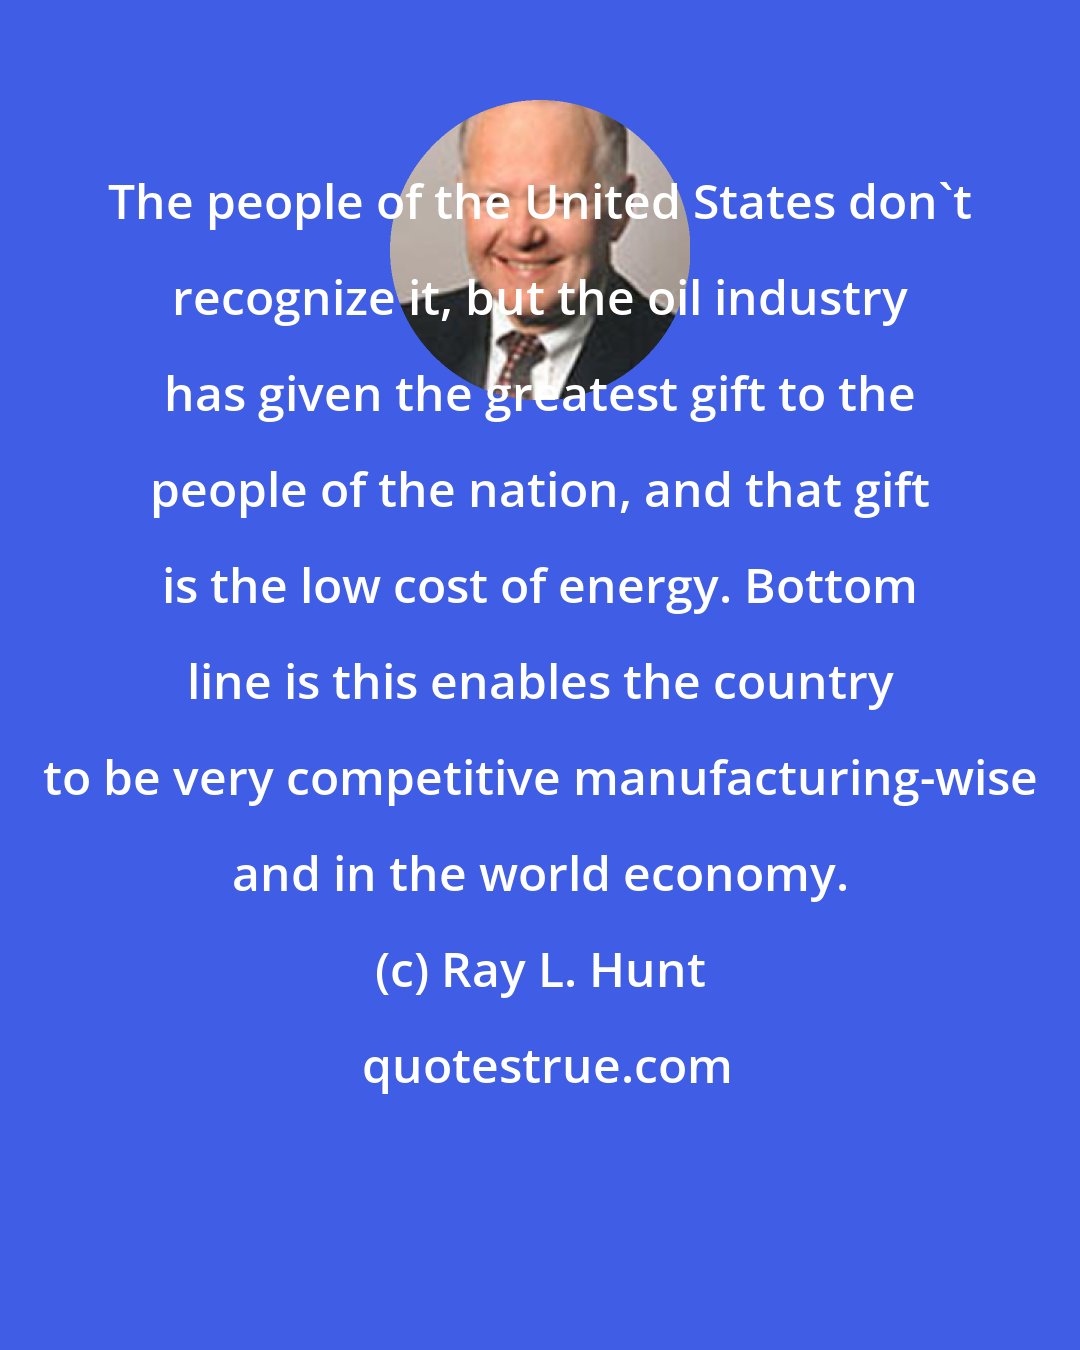 Ray L. Hunt: The people of the United States don't recognize it, but the oil industry has given the greatest gift to the people of the nation, and that gift is the low cost of energy. Bottom line is this enables the country to be very competitive manufacturing-wise and in the world economy.